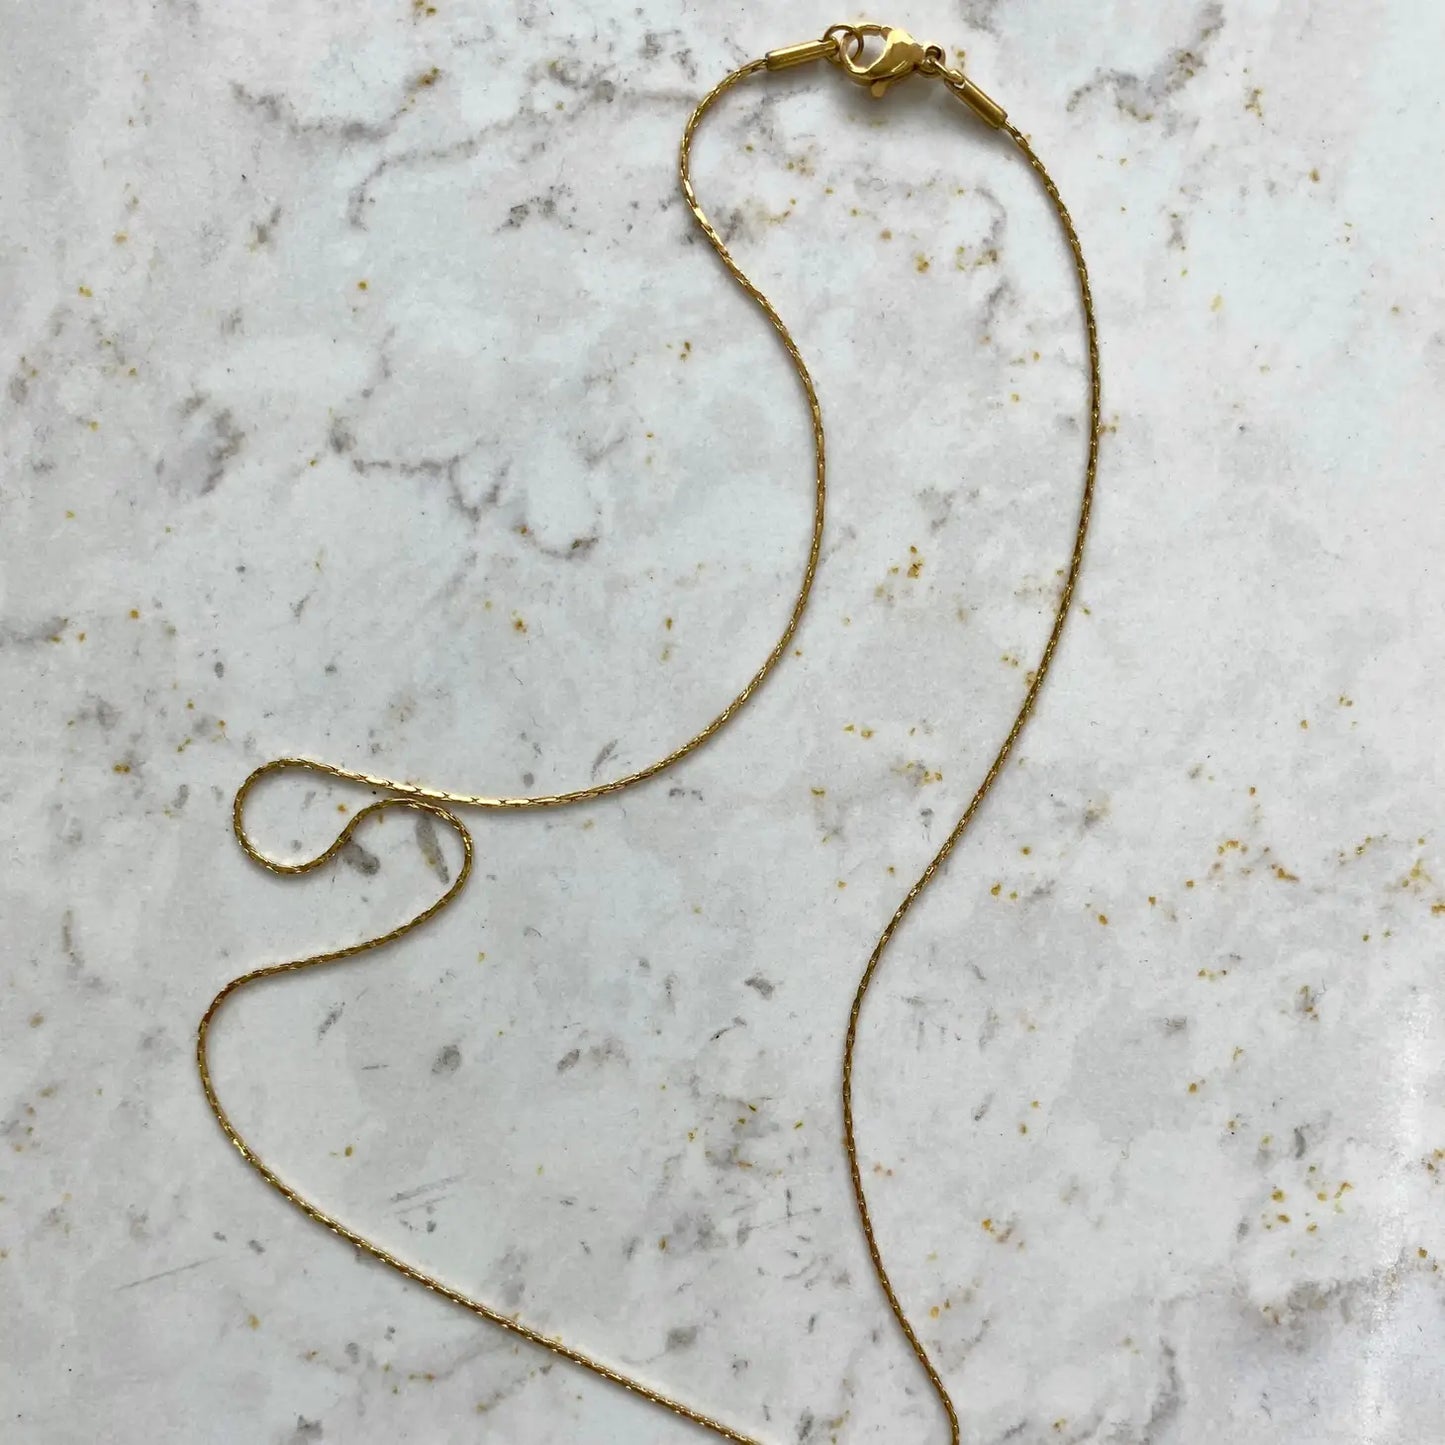 Nula WATERPROOF Gold Necklaces Styles